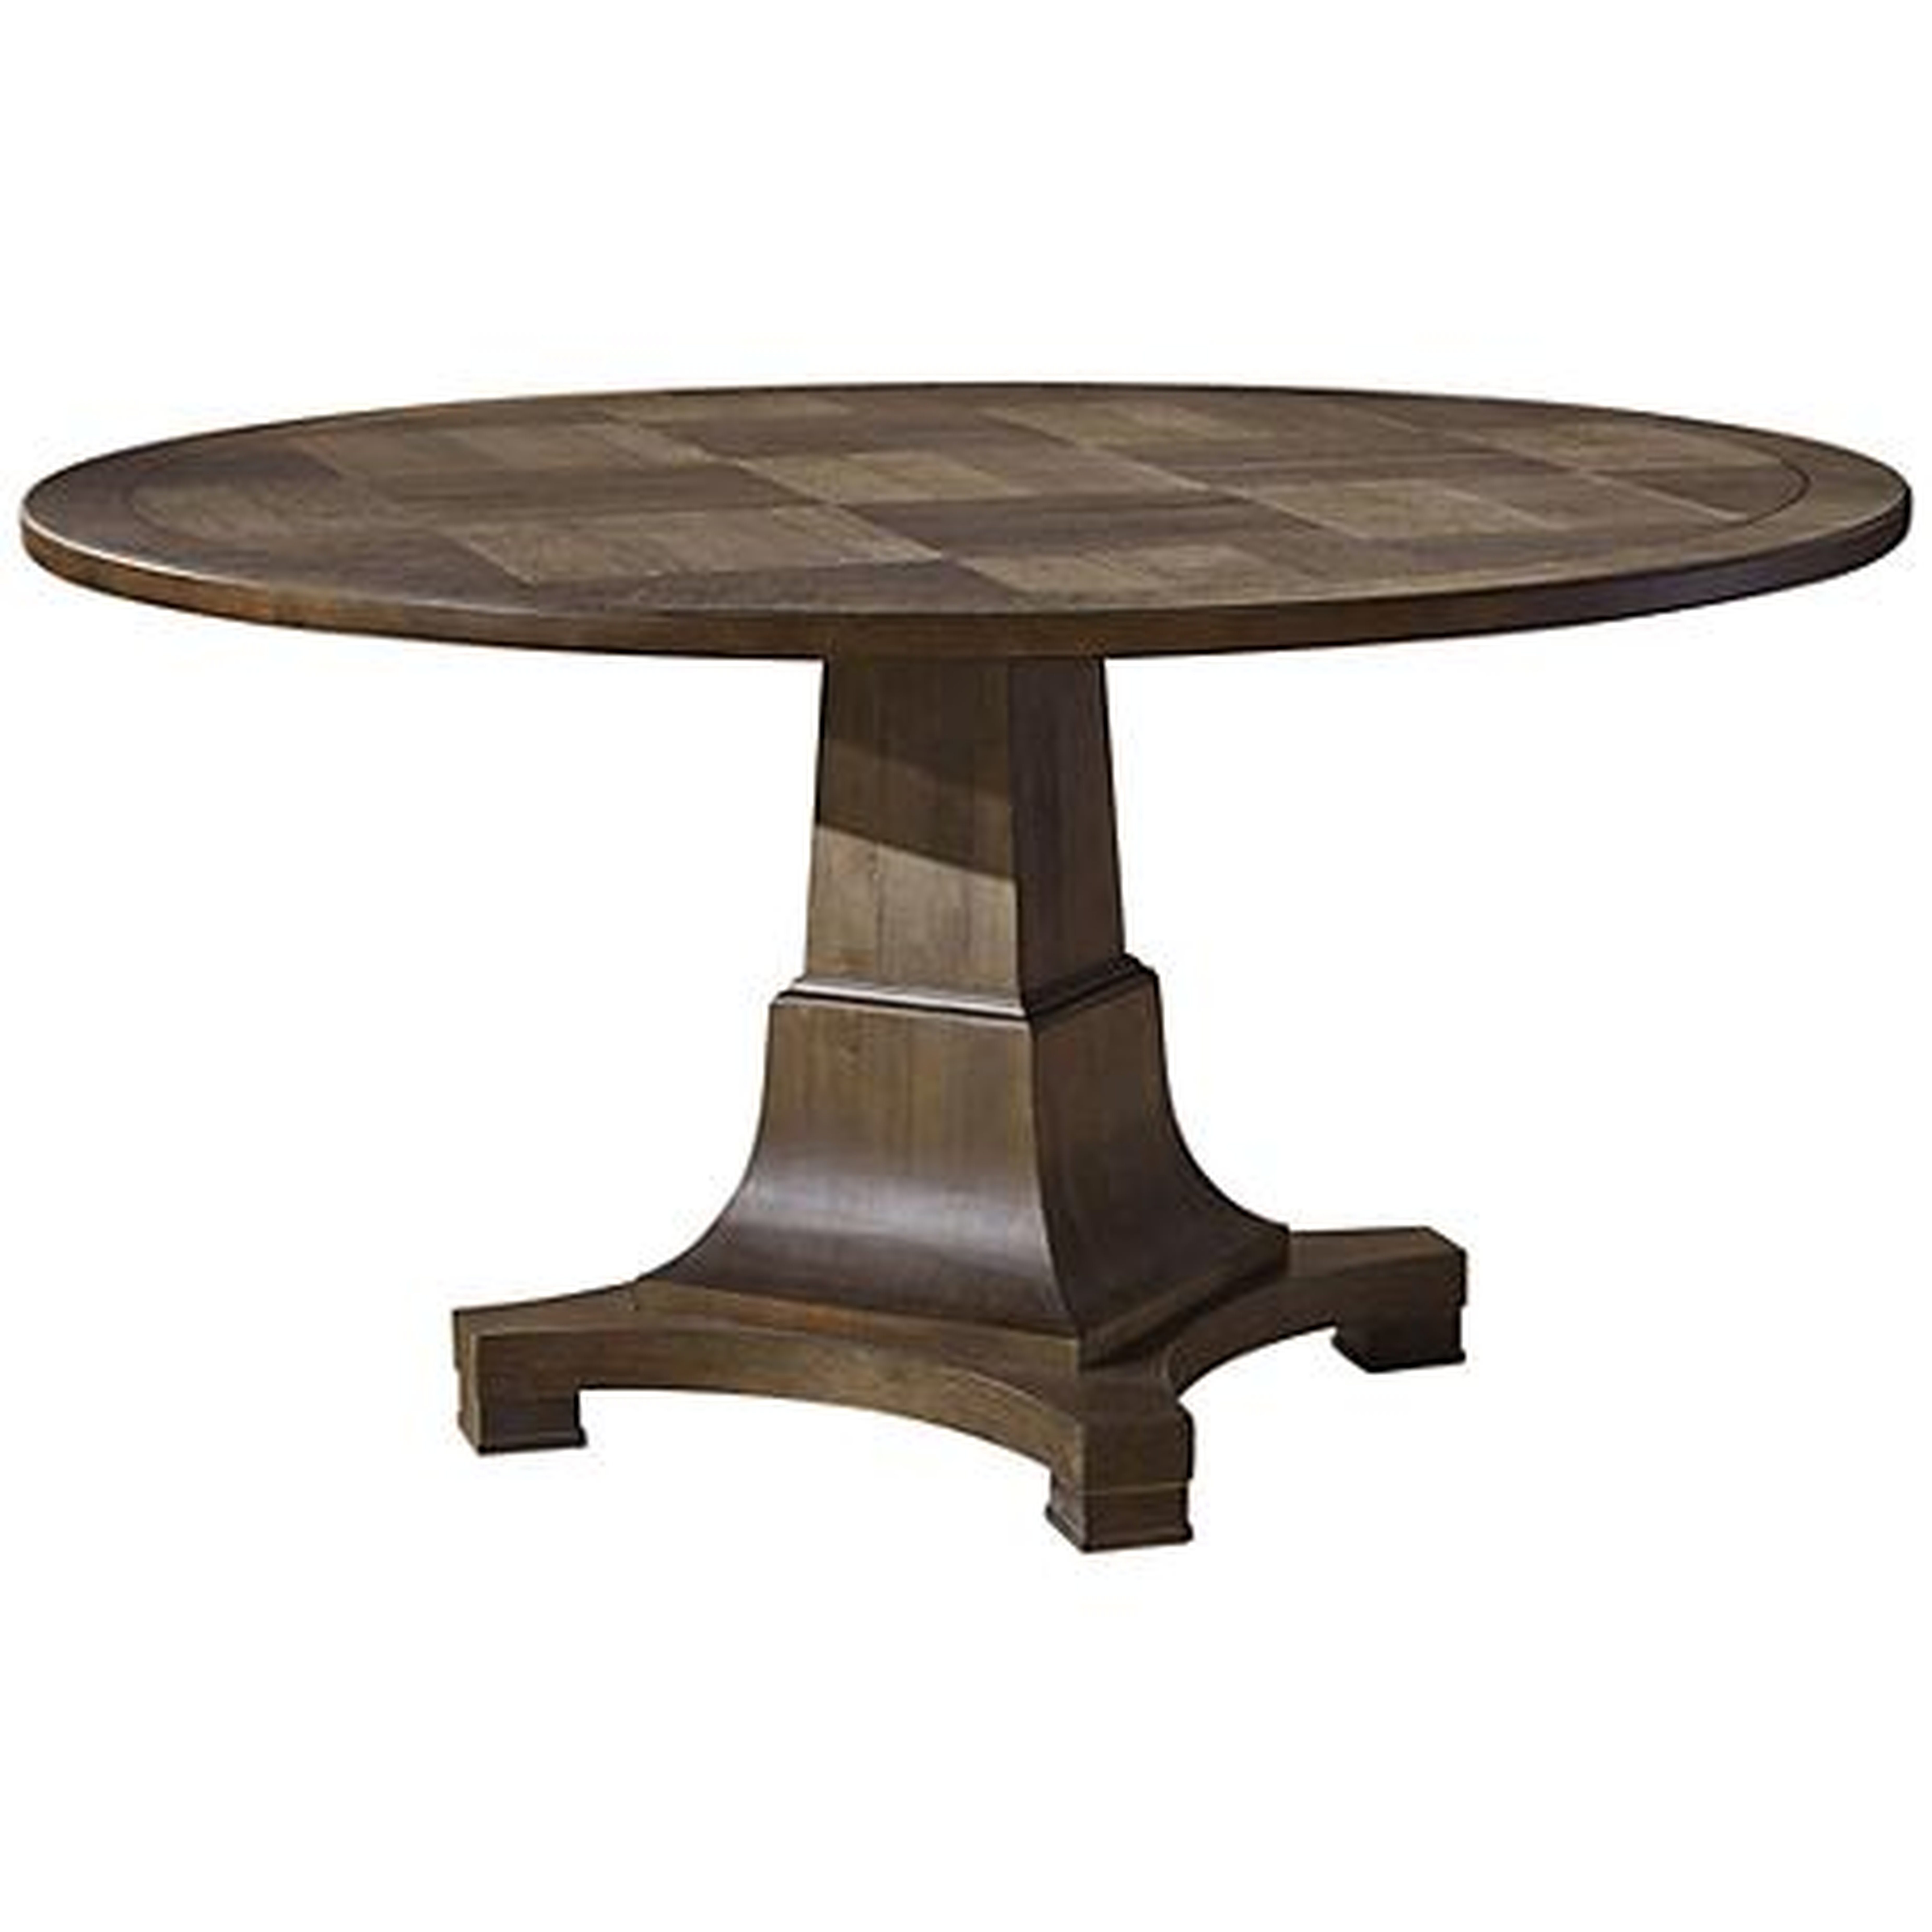 Playlist Eyed Girl Wood Round Dining Table brown - Lamps Plus